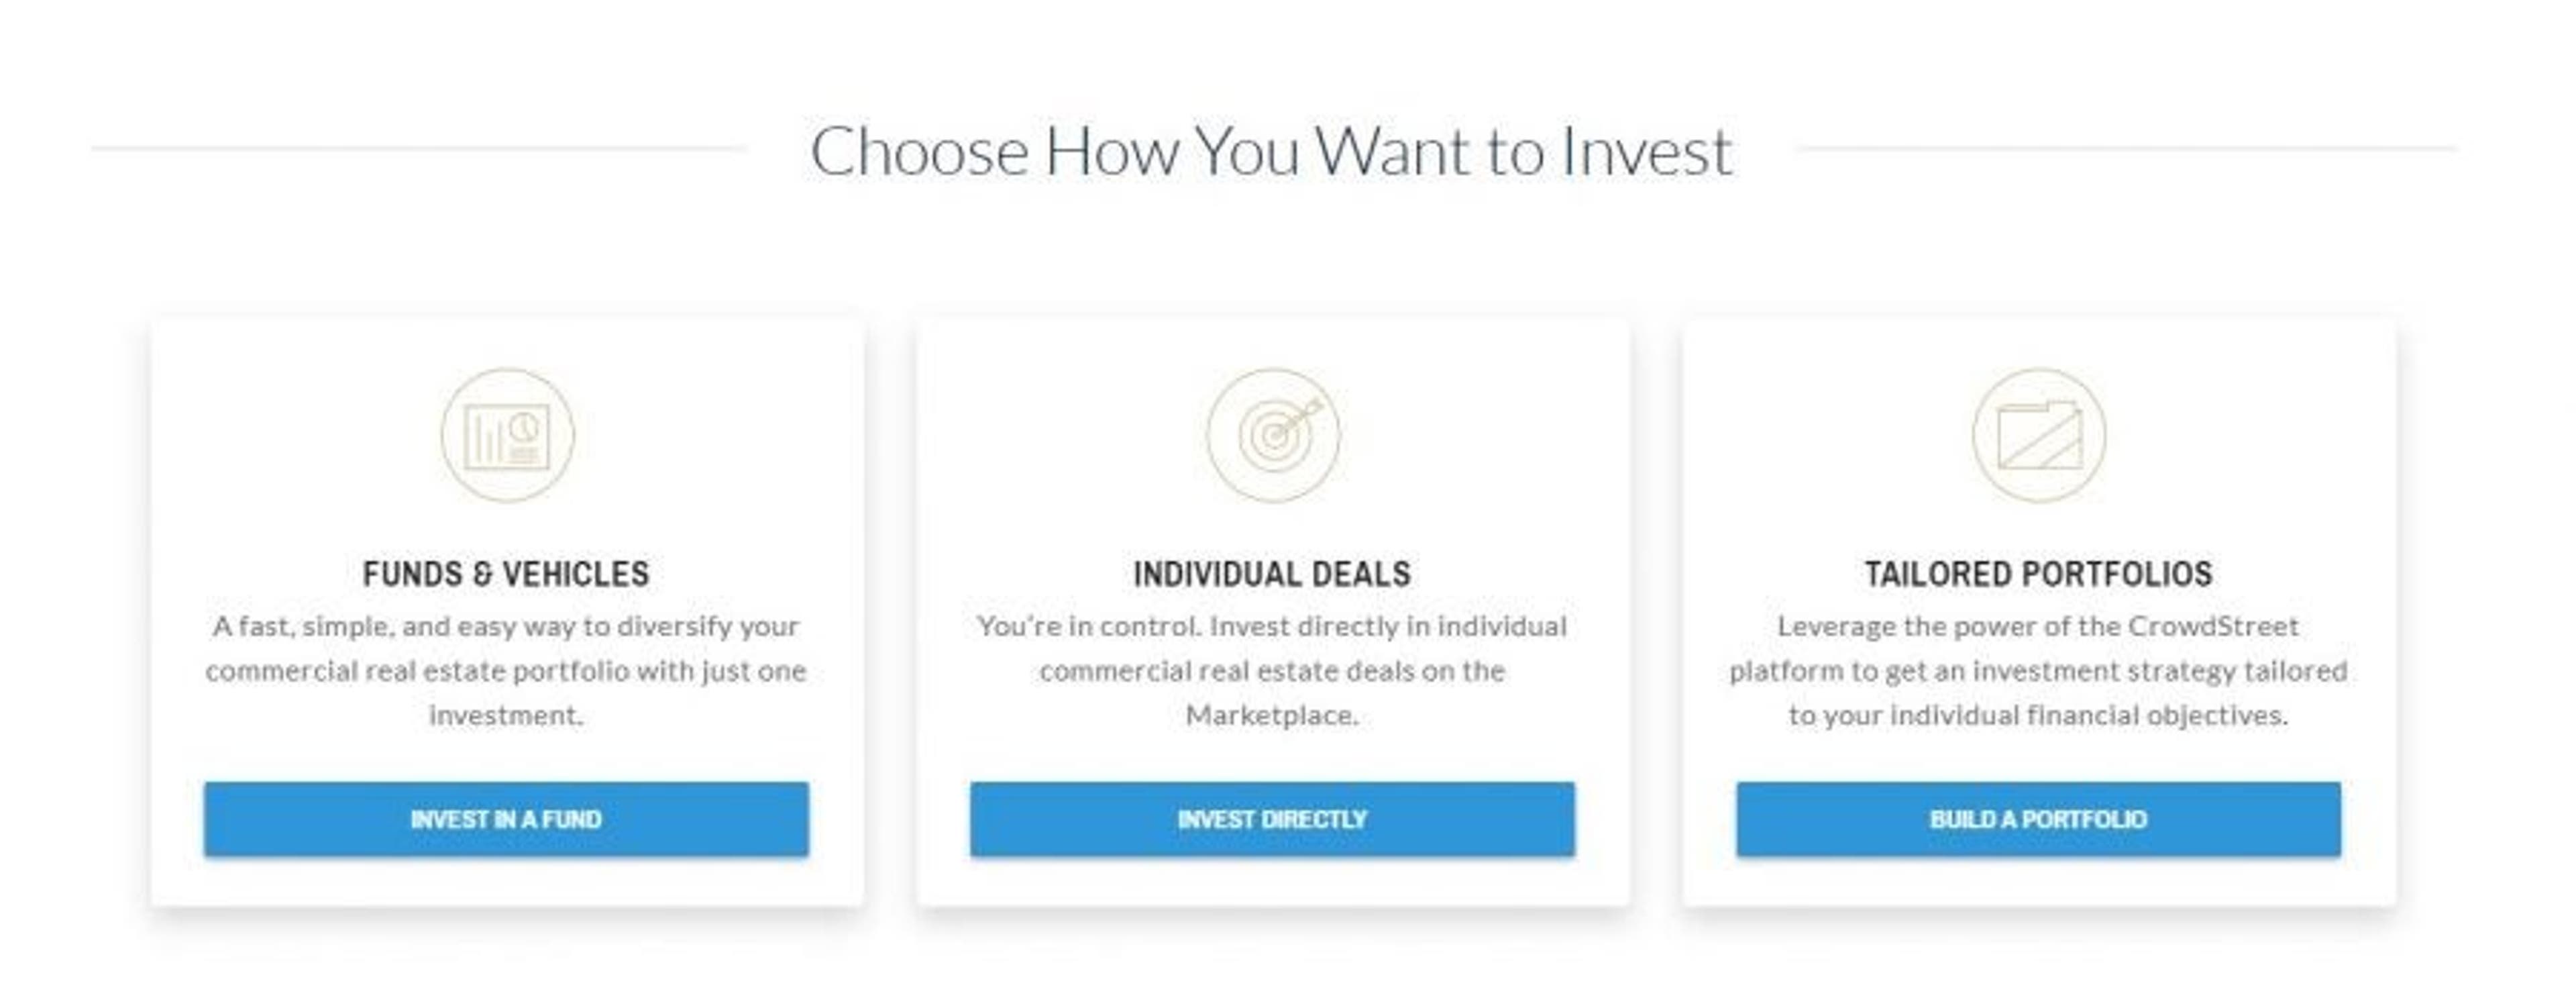 crowdstreet-investment-types